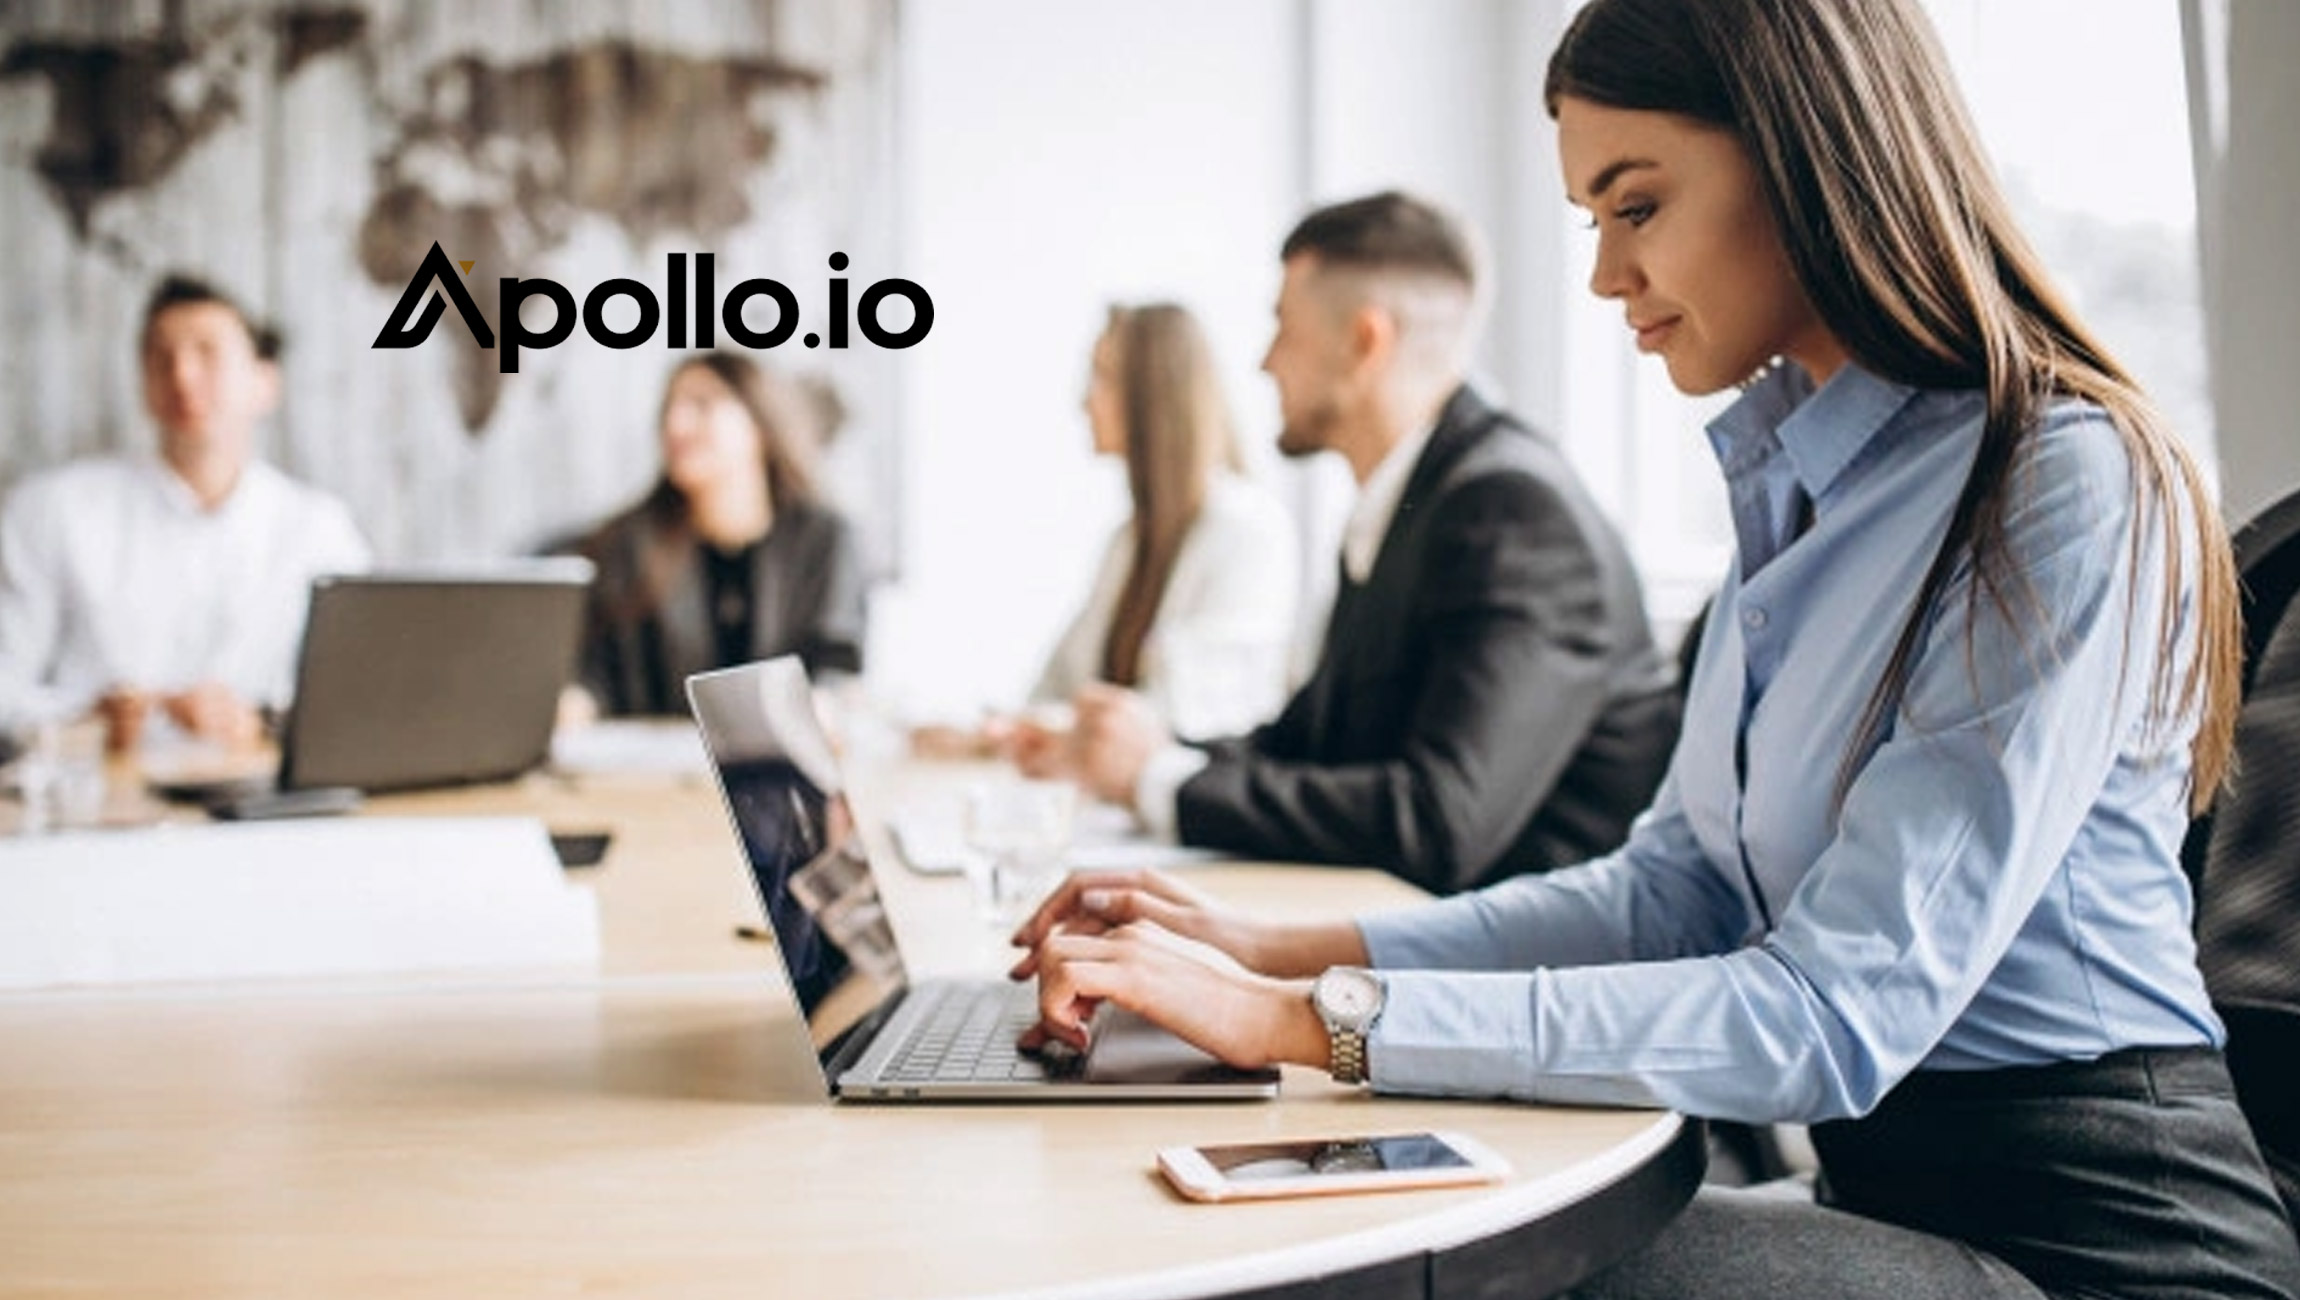 Apollo.io Receives Industry Accolades for Innovation in Sales & Marketing Technology